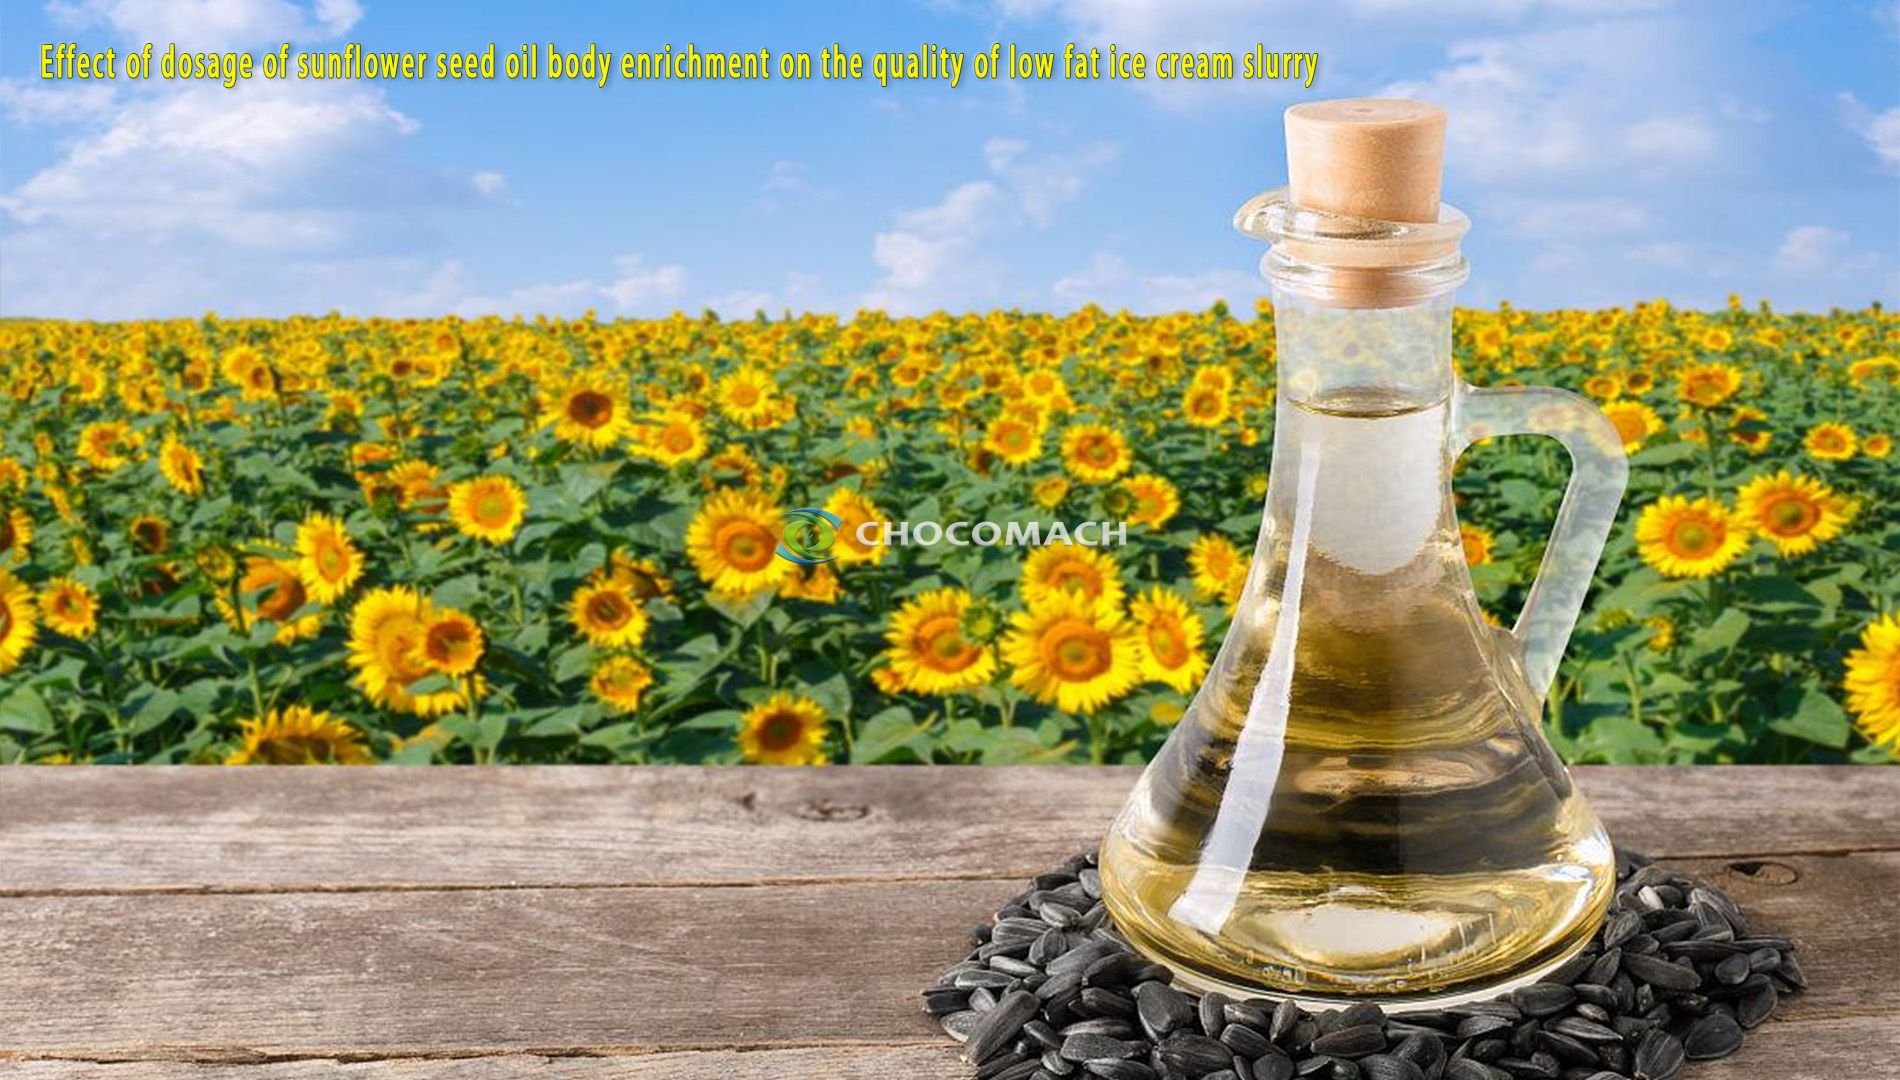 Effect of dosage of sunflower seed oil body enrichment on the quality of low fat ice cream slurry and product